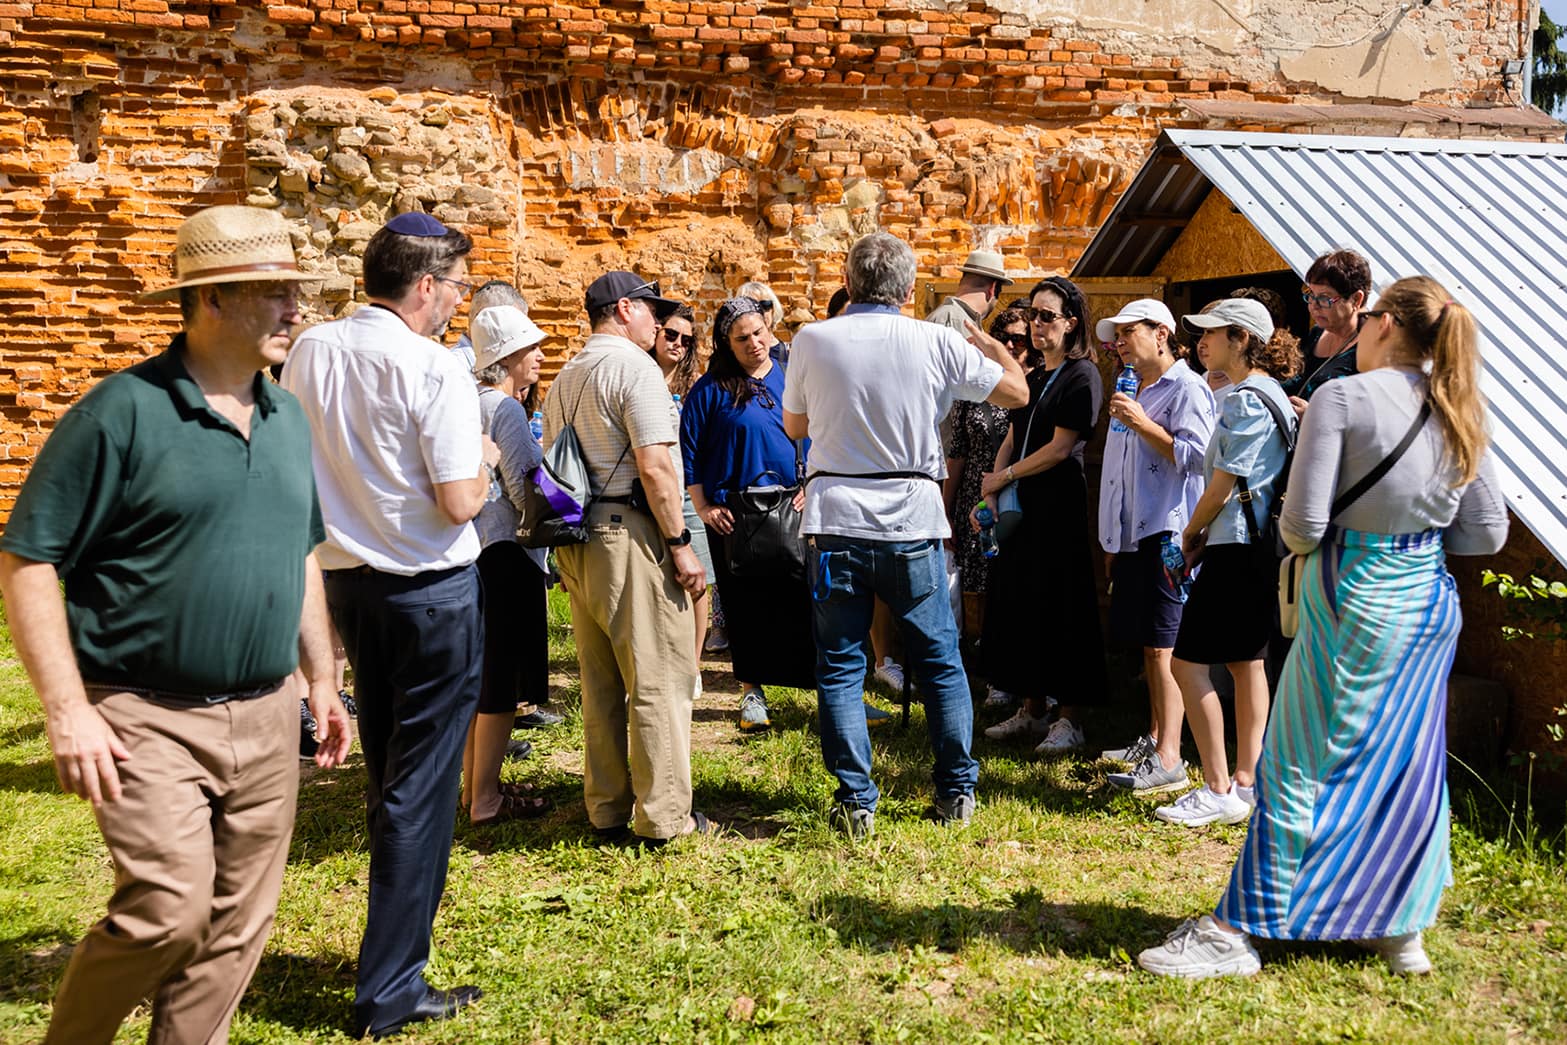 On July 5th, guests were invited to join a walking tour of Jewish Bardejov led by Pavol Hudak.